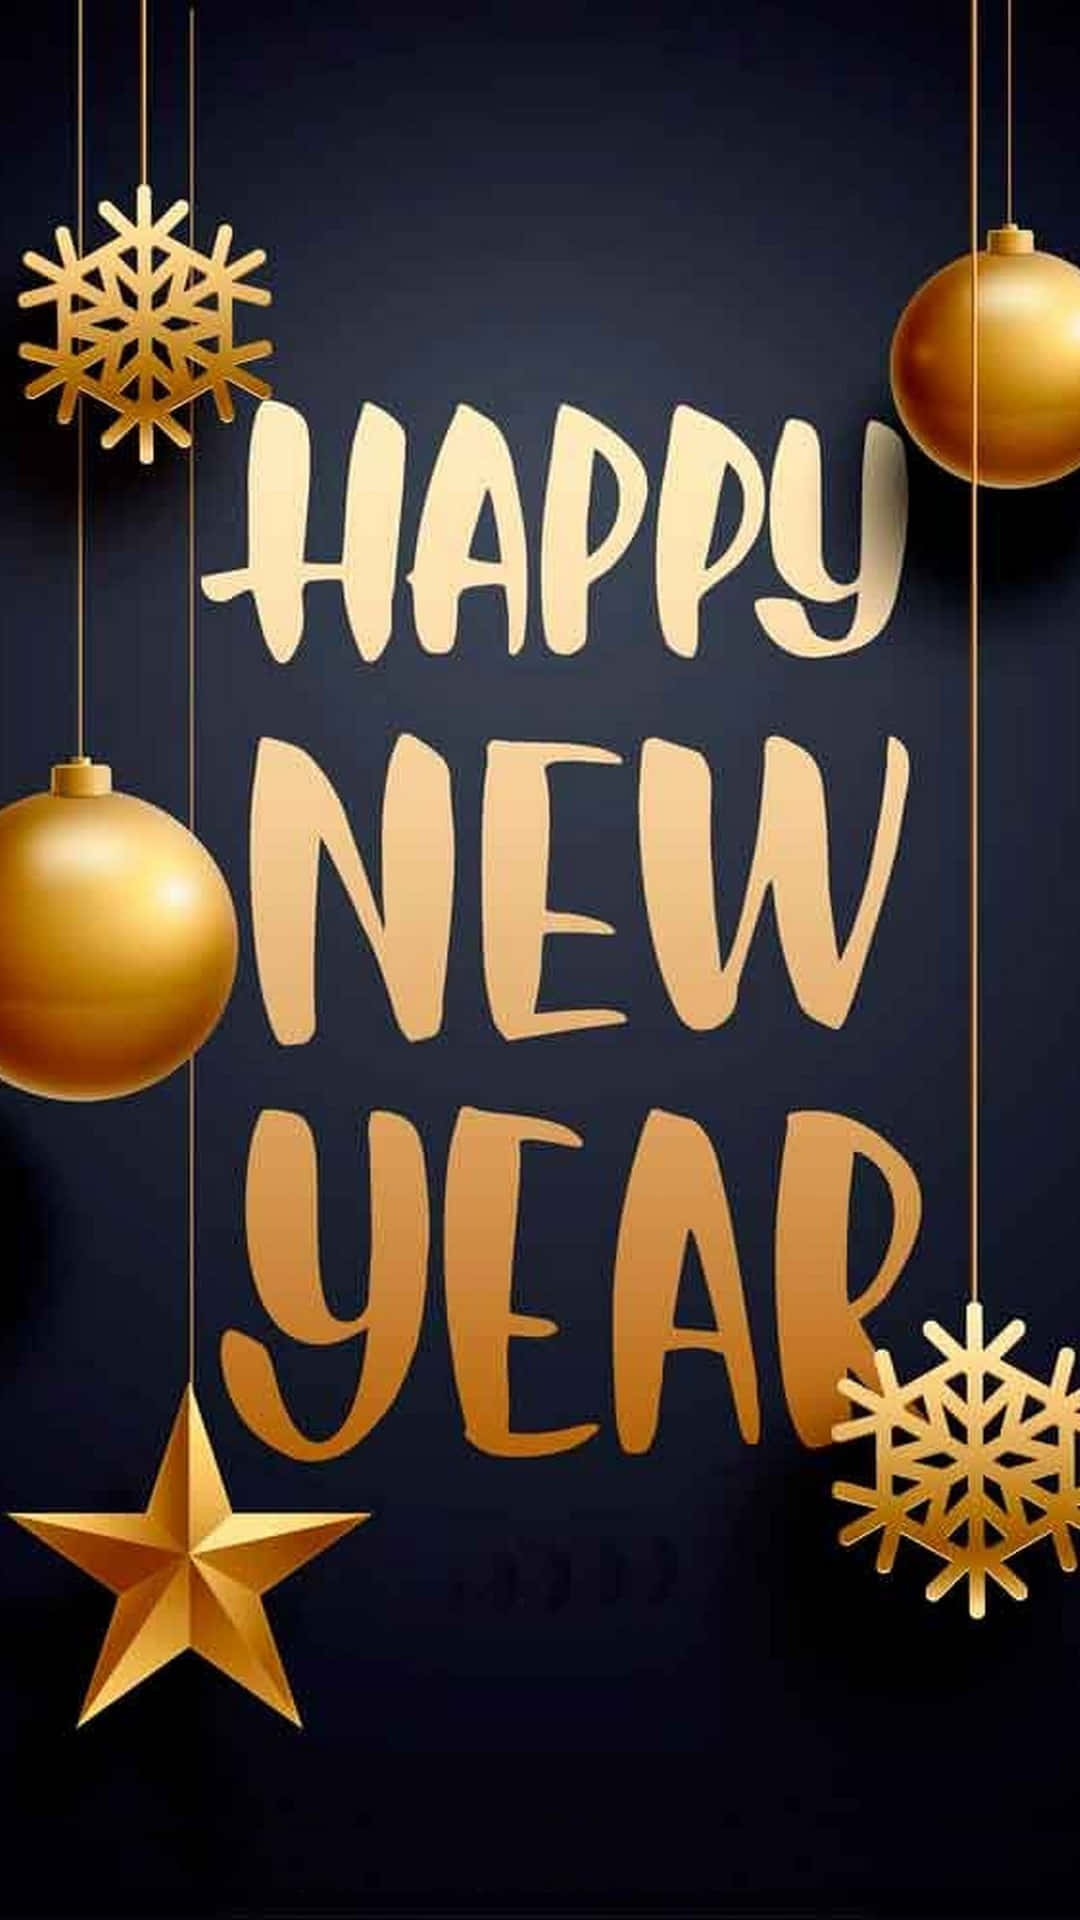 Download Happy New Year Iphone Wallpaper